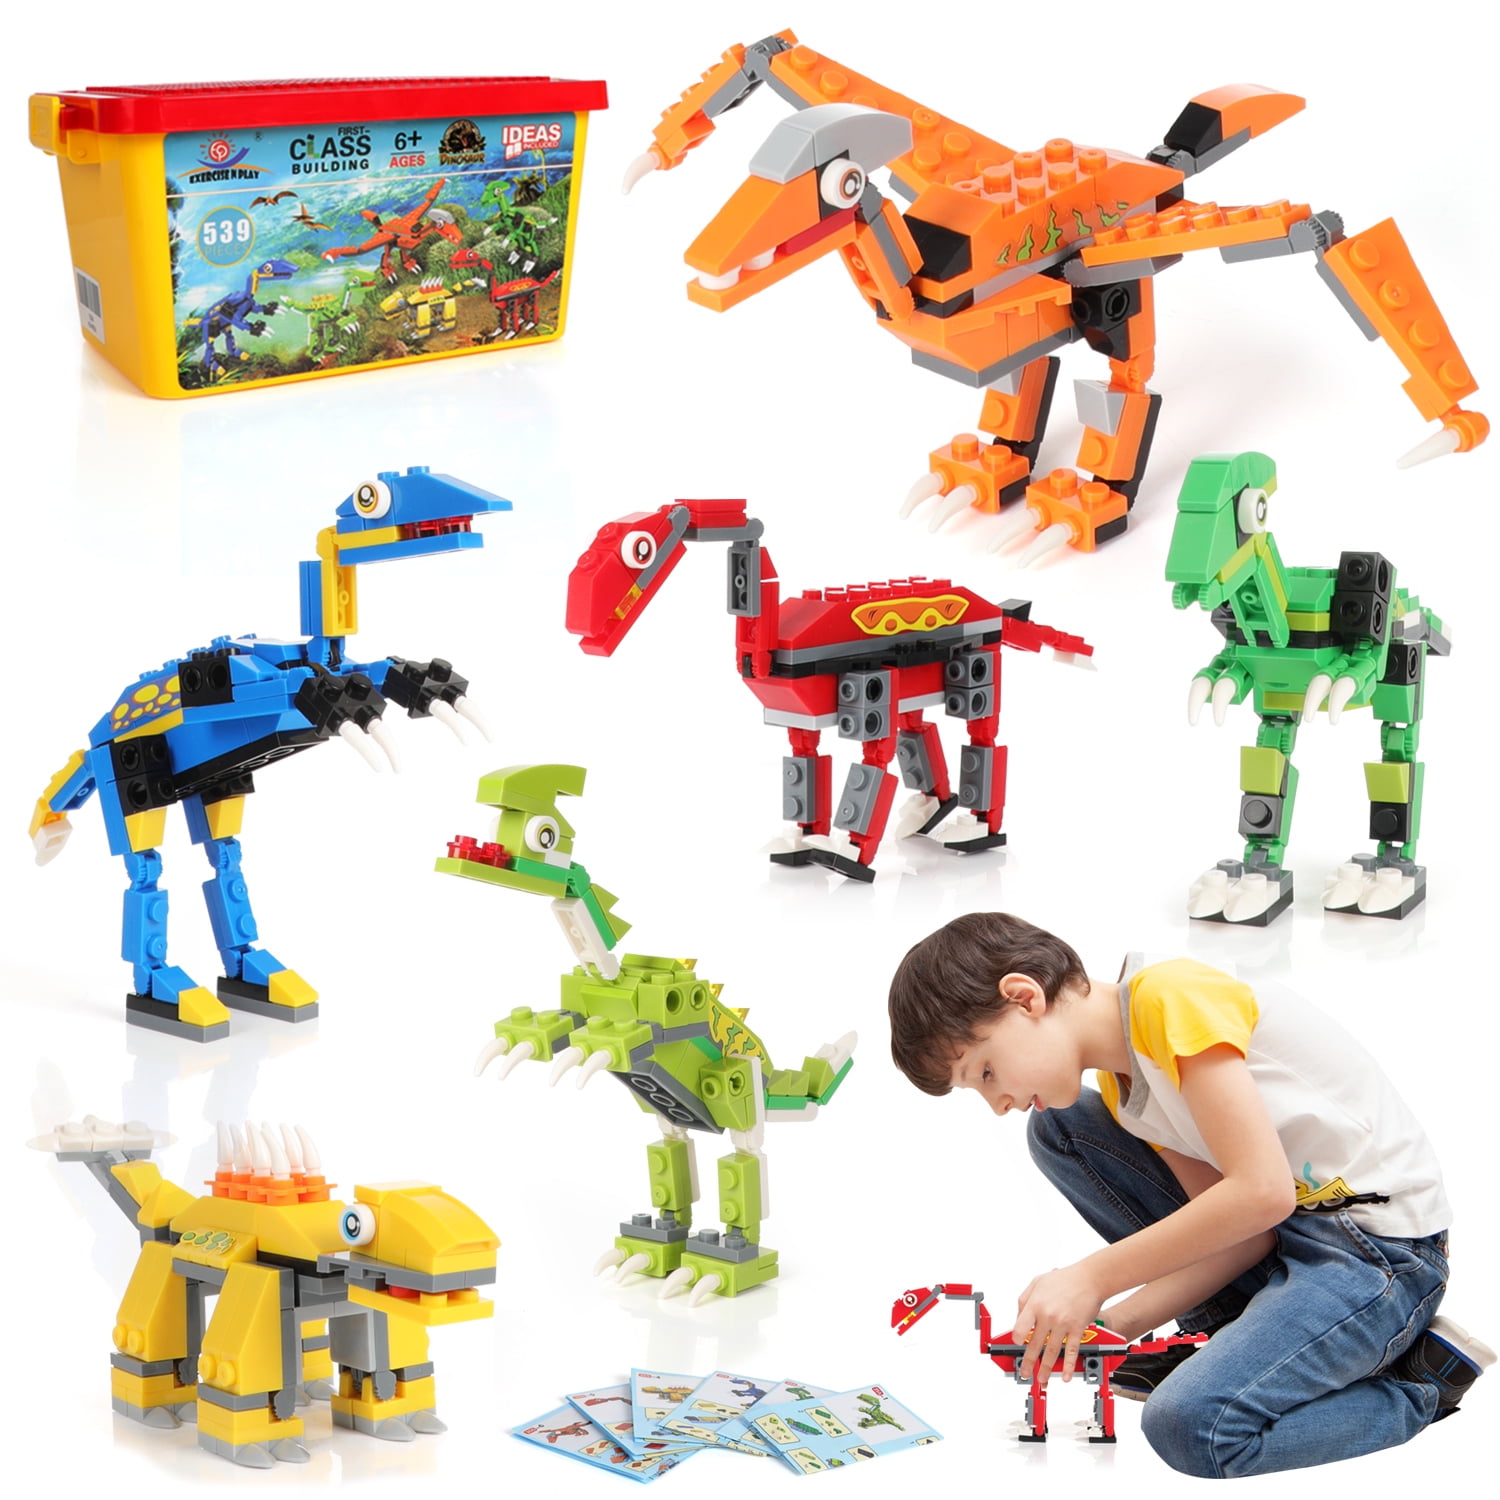 Educational Construction Engineering Learning Toy Set for Boys Gift Age 6 7 8 9 10 11 12 Year Old 6 in 1 Dinosaurs Building Bricks Toys for Kid GARUNK 673 Pcs Dinosaurs Building Blocks Set 